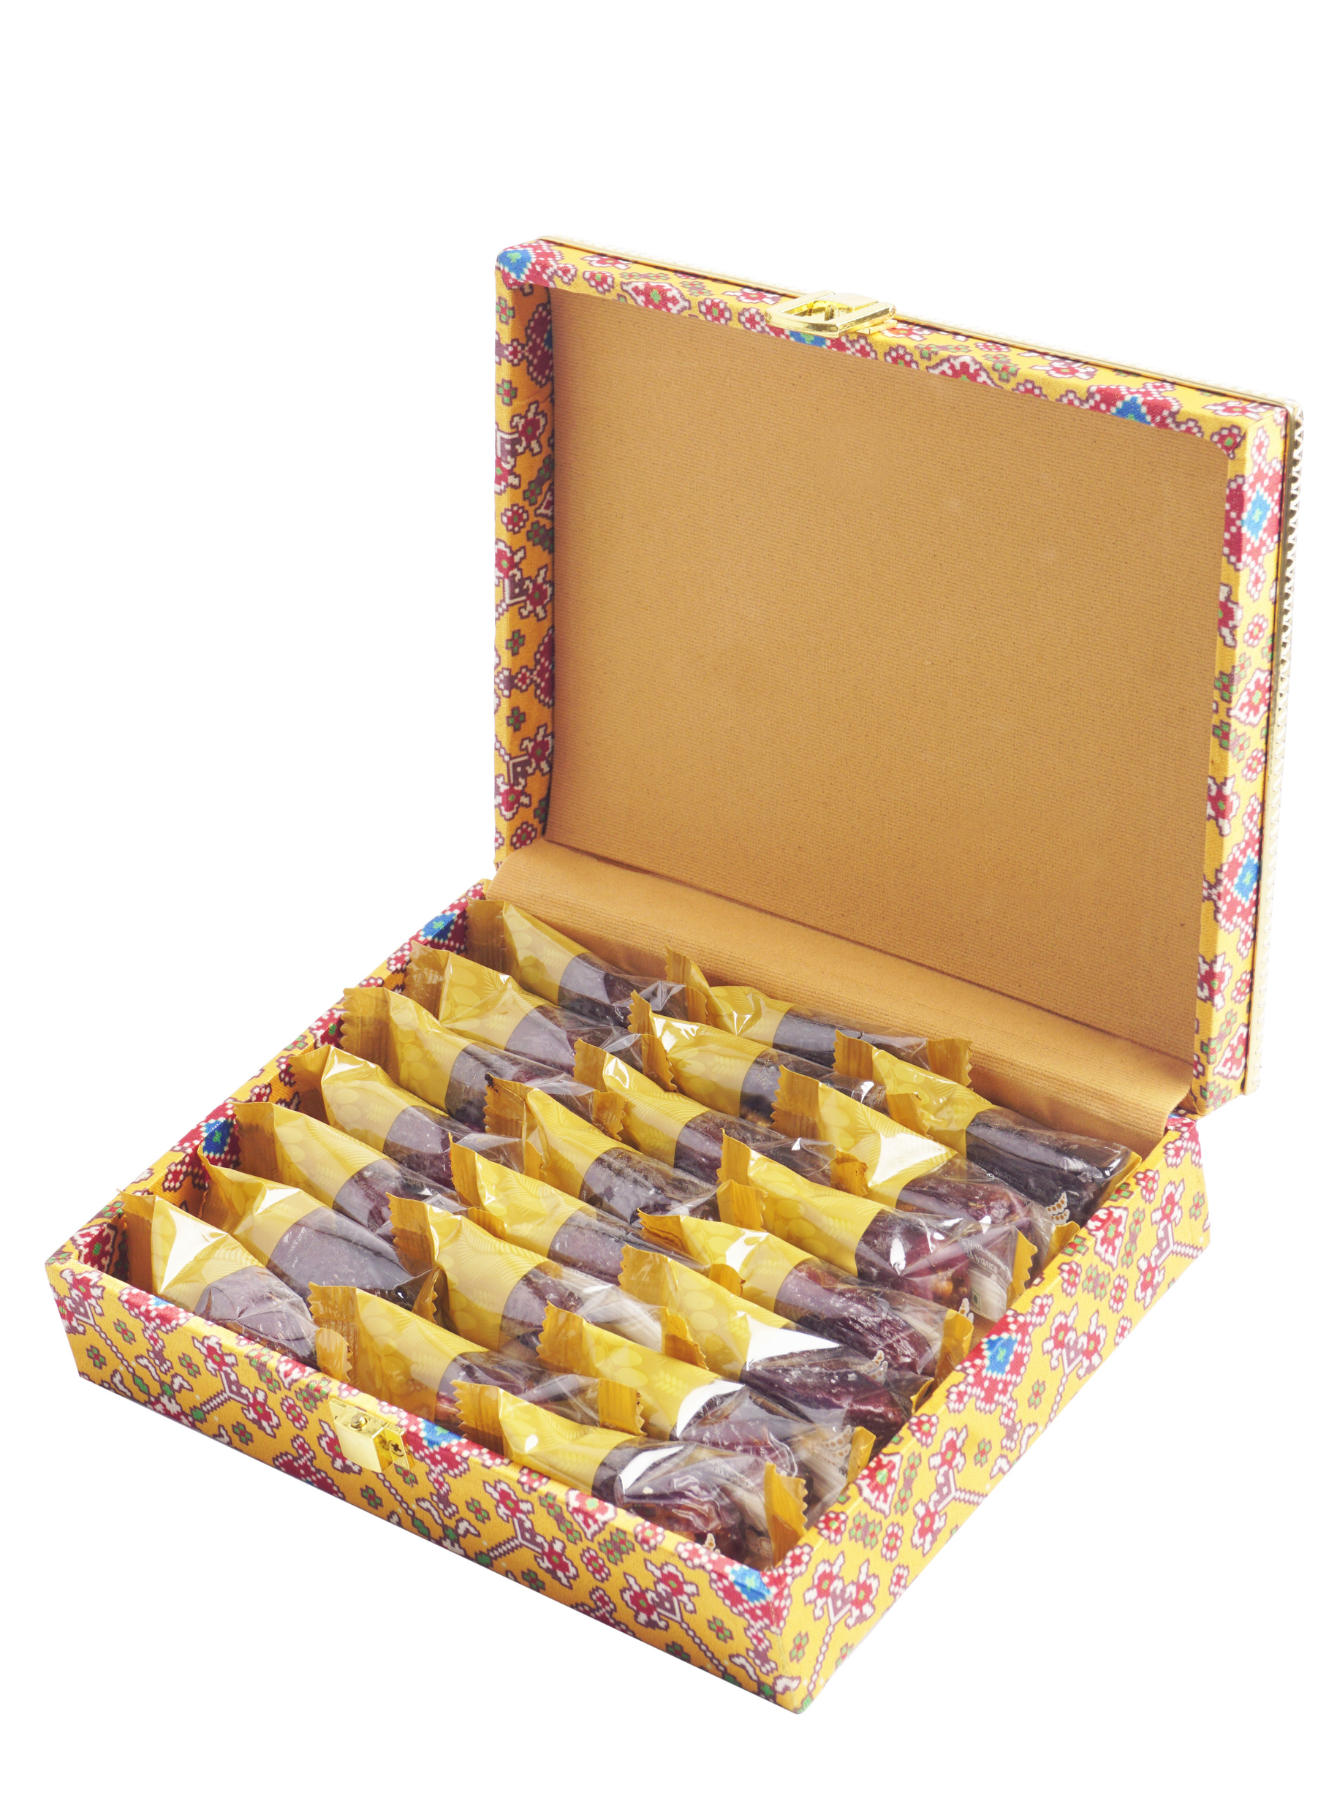 Safawi Dates with Yellow Patola MDF Box With Gold Leather Finish (21 Pcs)